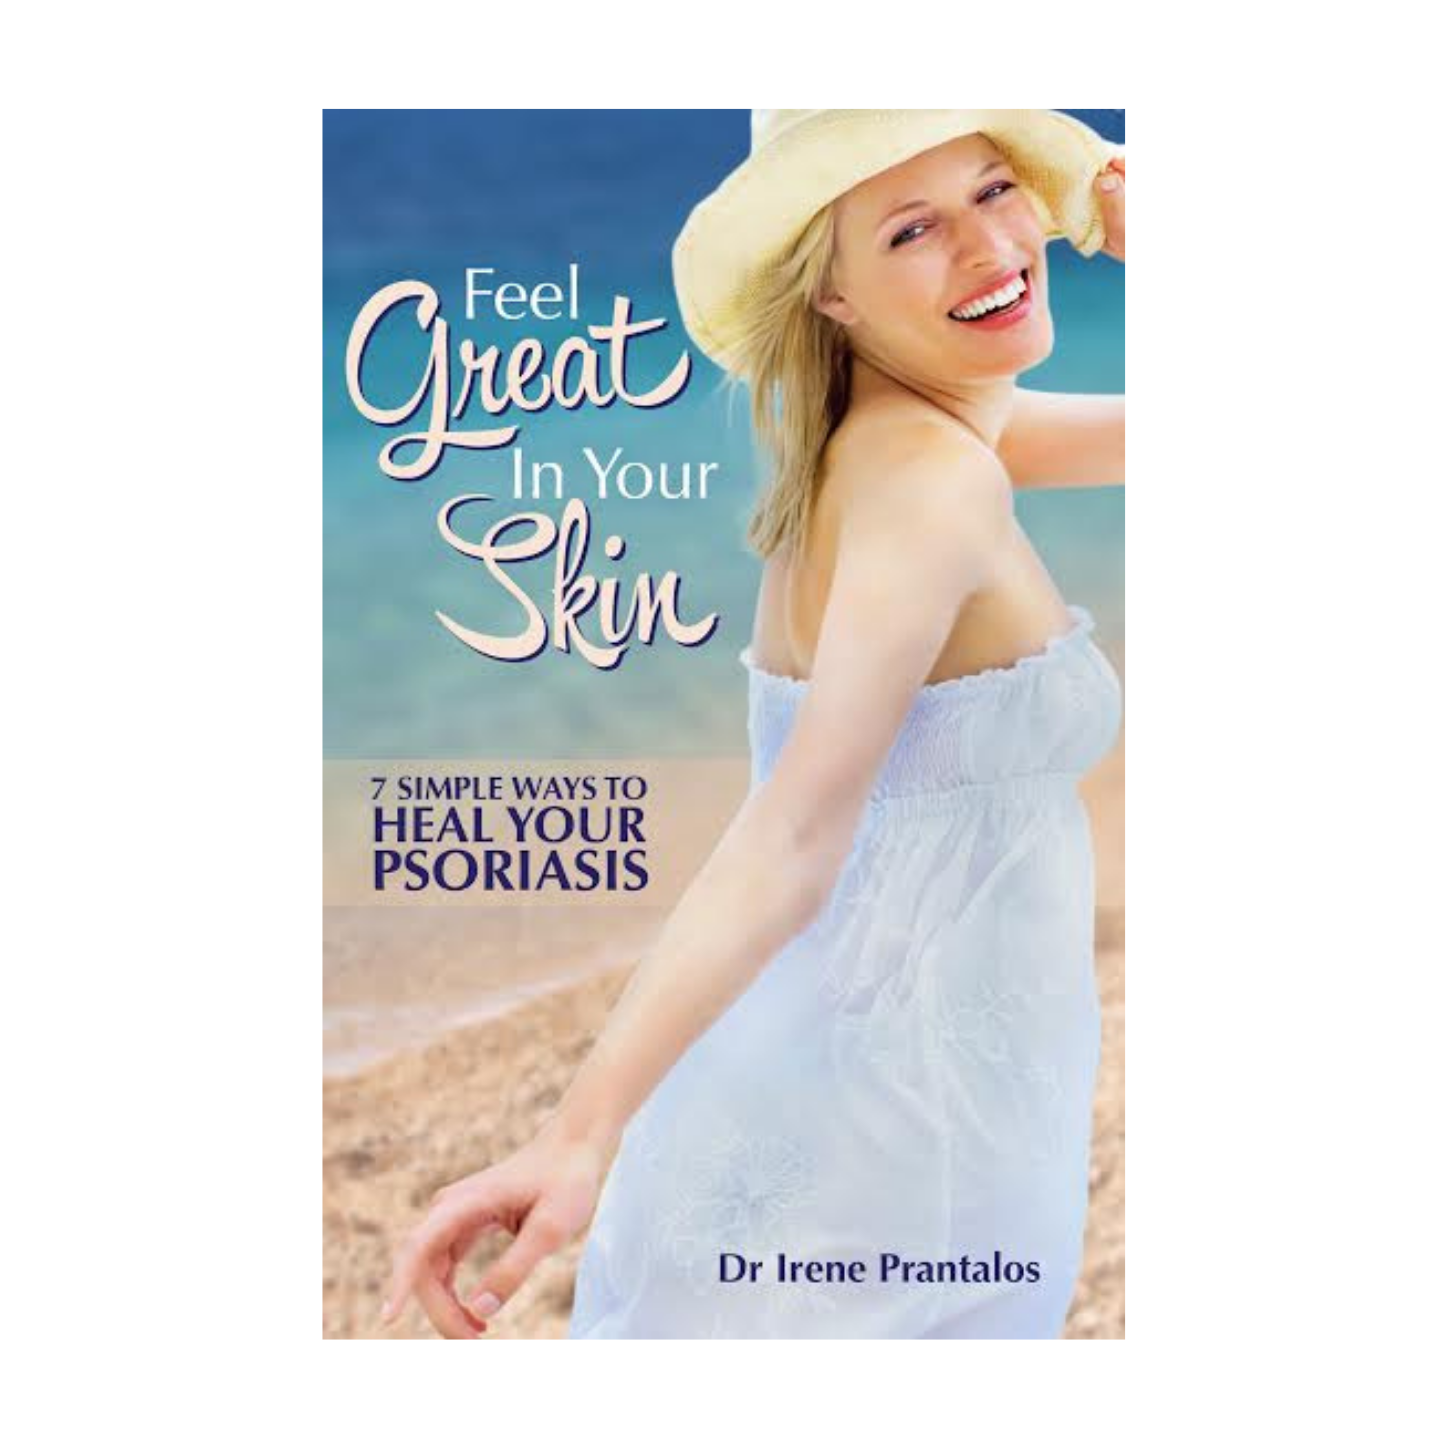 Feel Great In Your Skin a book about healing psoriasis based on the author's own experience with the disease.